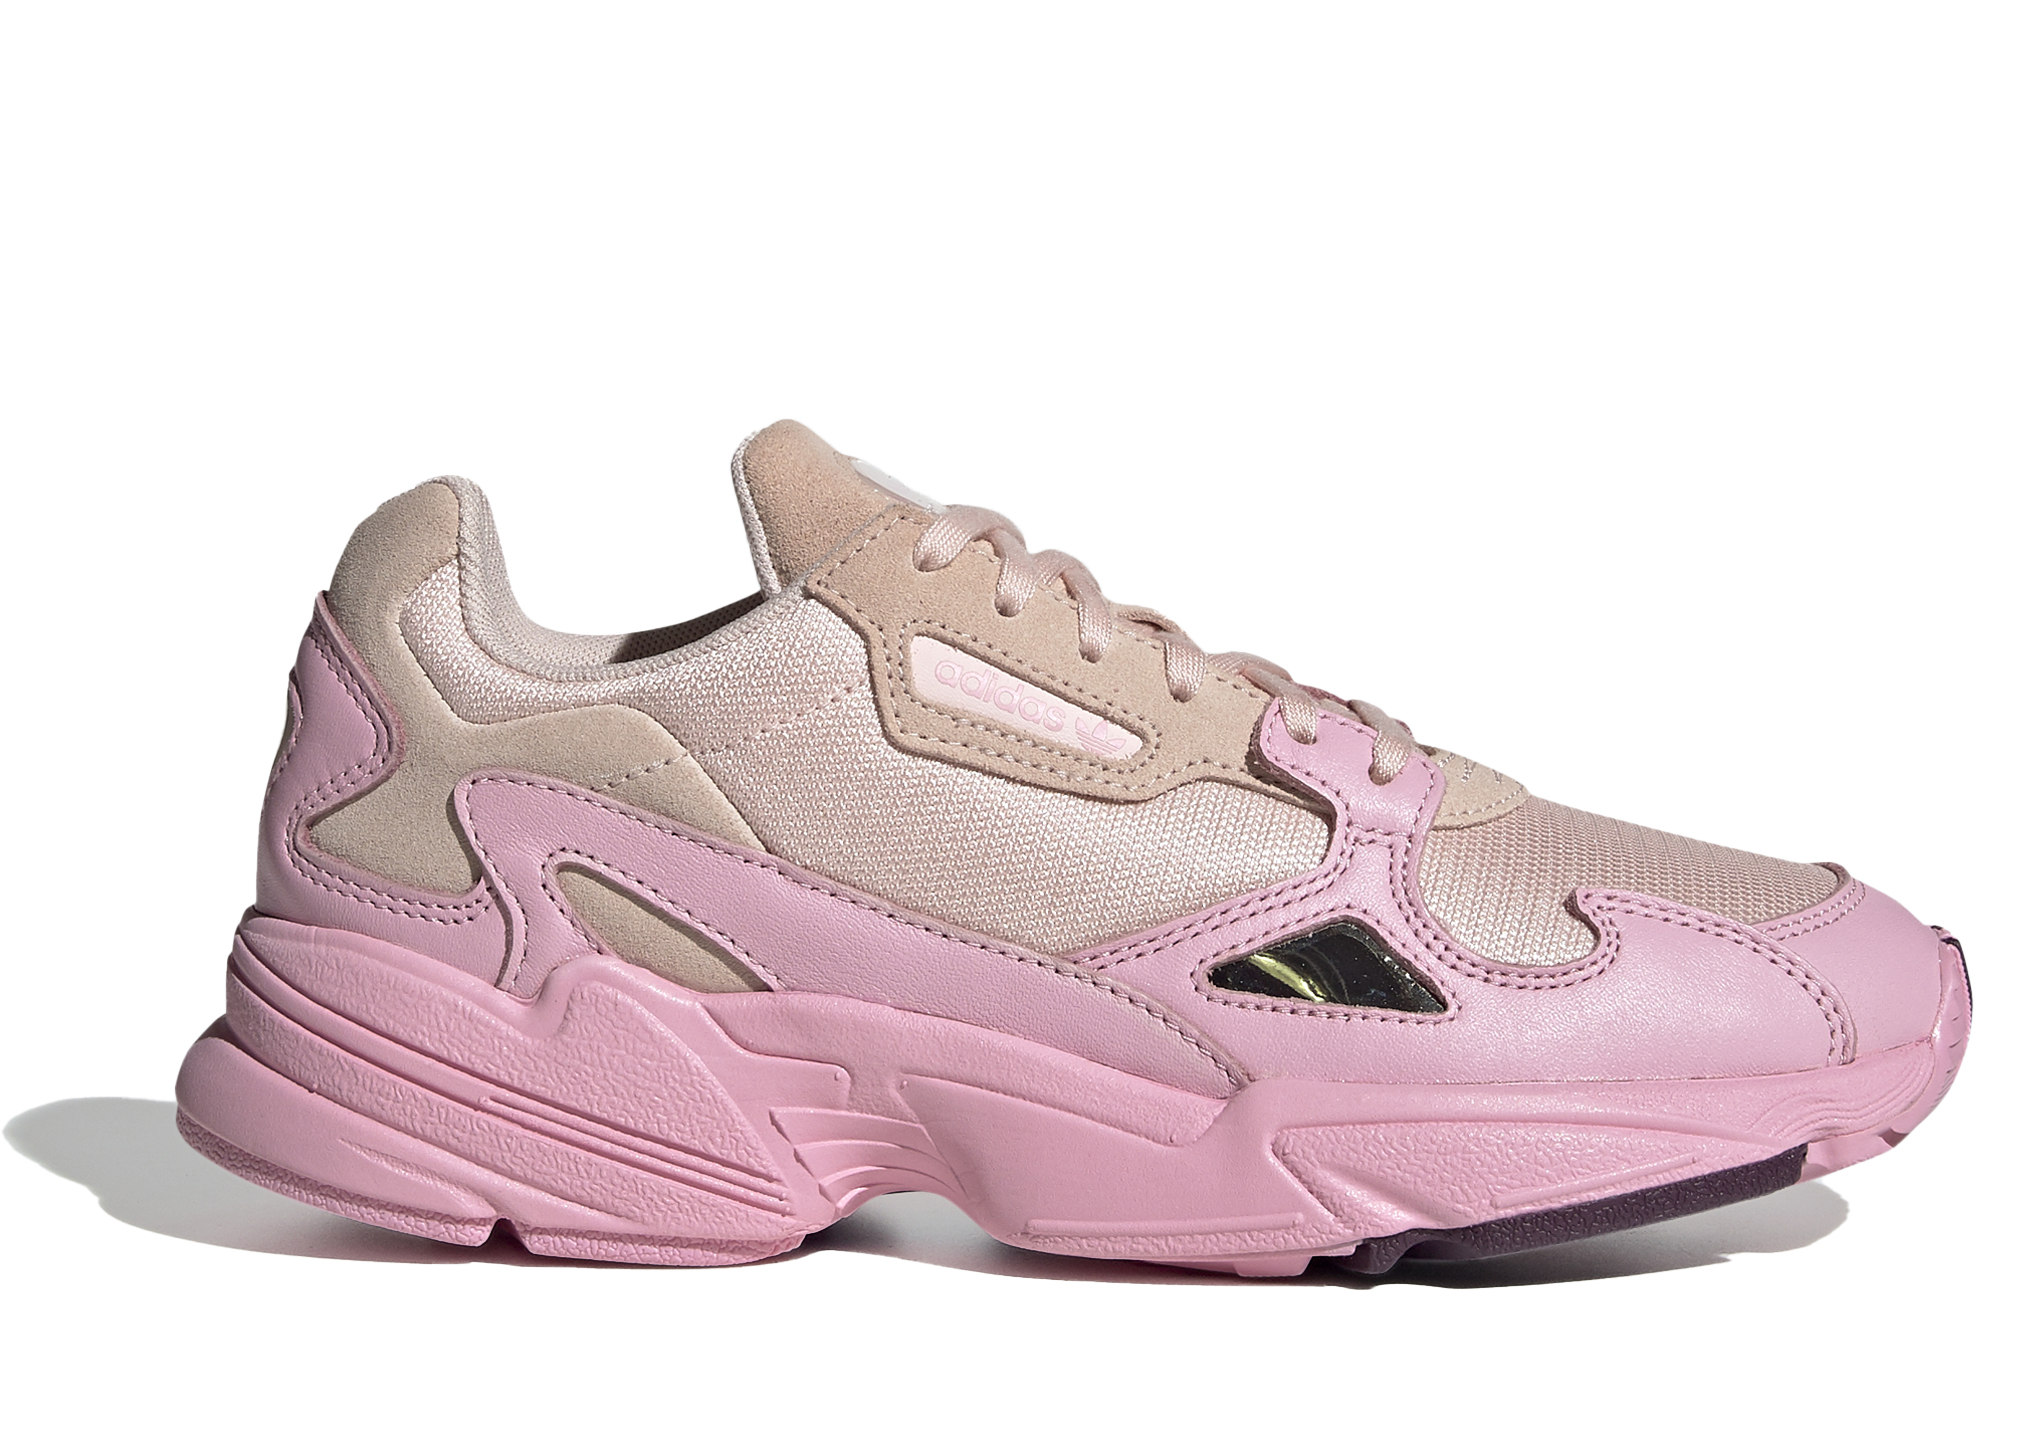 adidas Falcon Icey Pink (Women's) - EF1994 - US